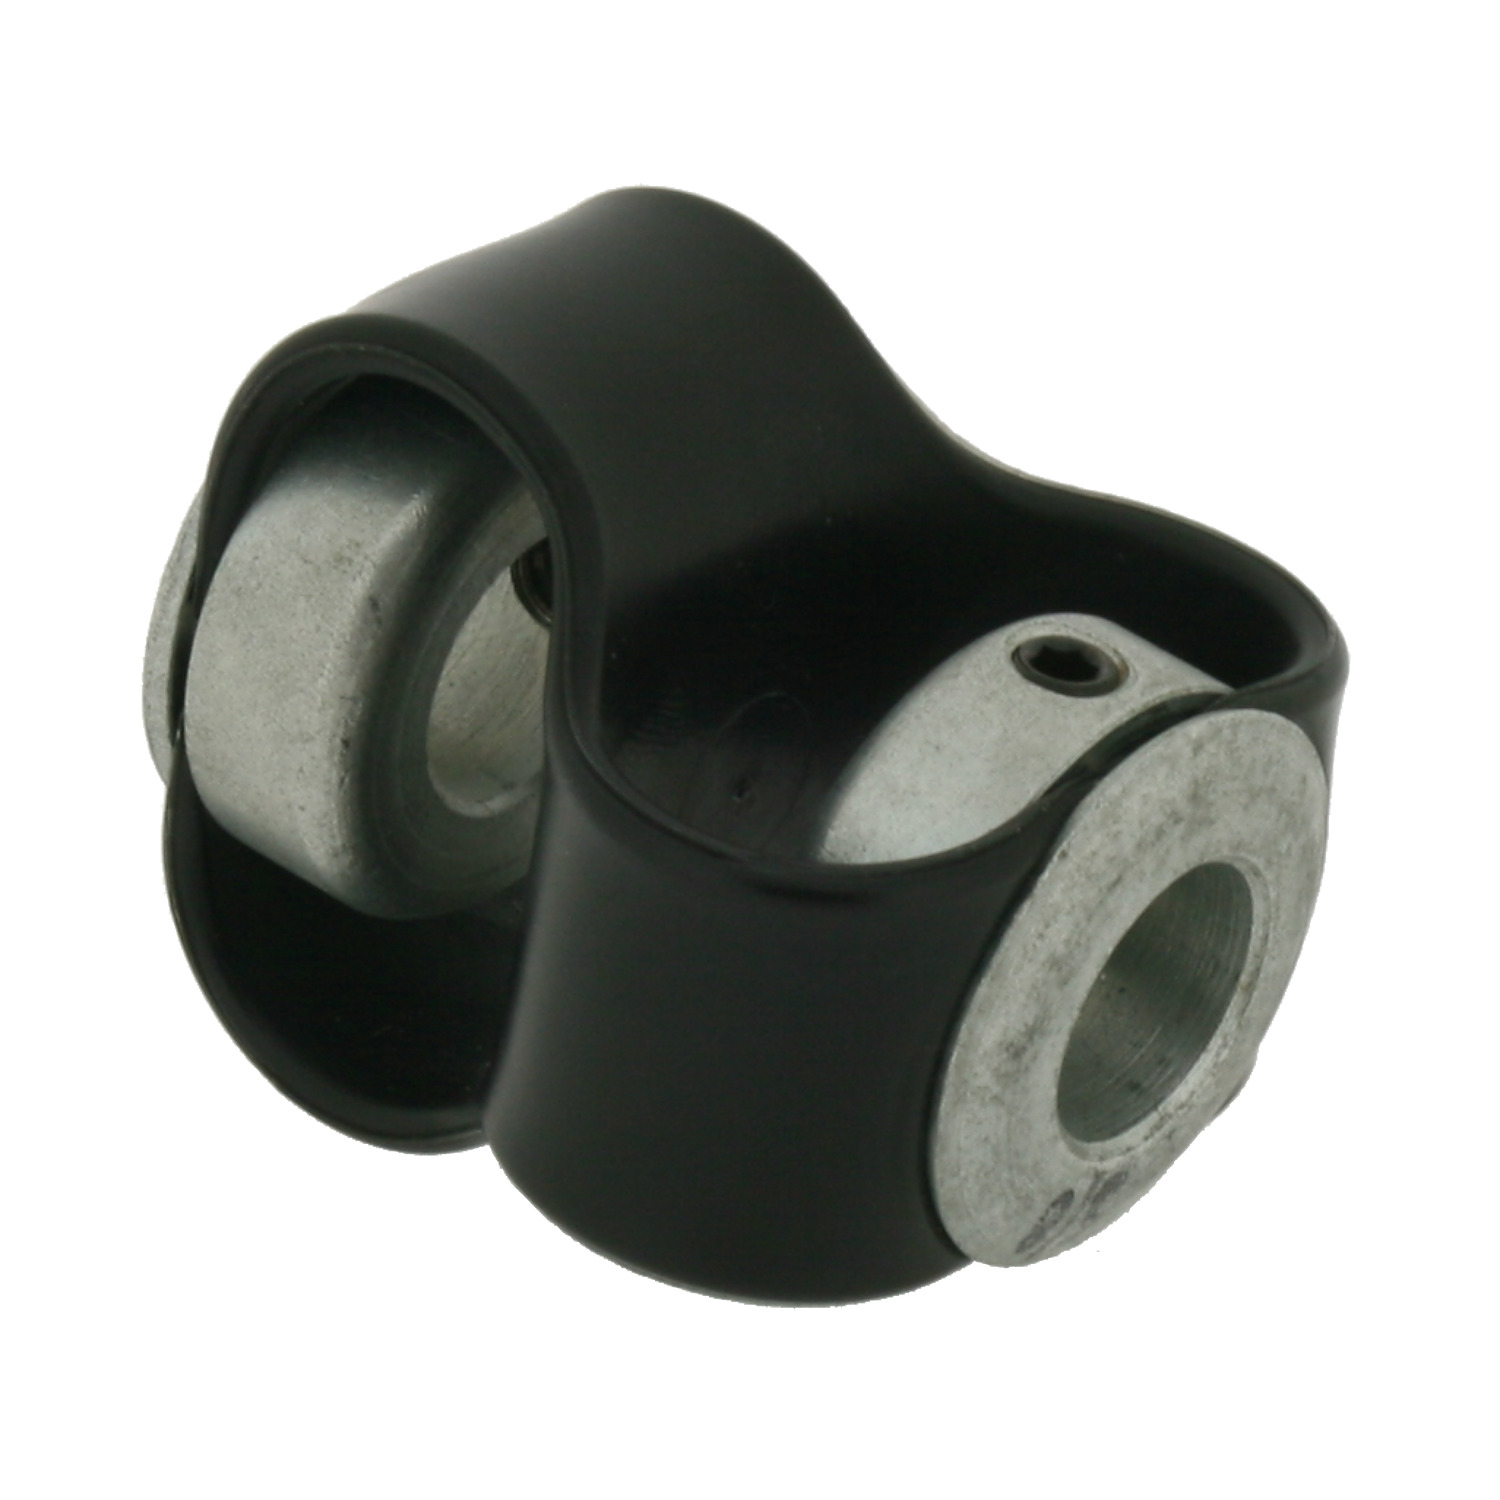 Plastic Insert Couplings Flexible couplings featuring plastic inserts to help absorb end play. Includes a variety of designs with materials from neoprene to silicone.